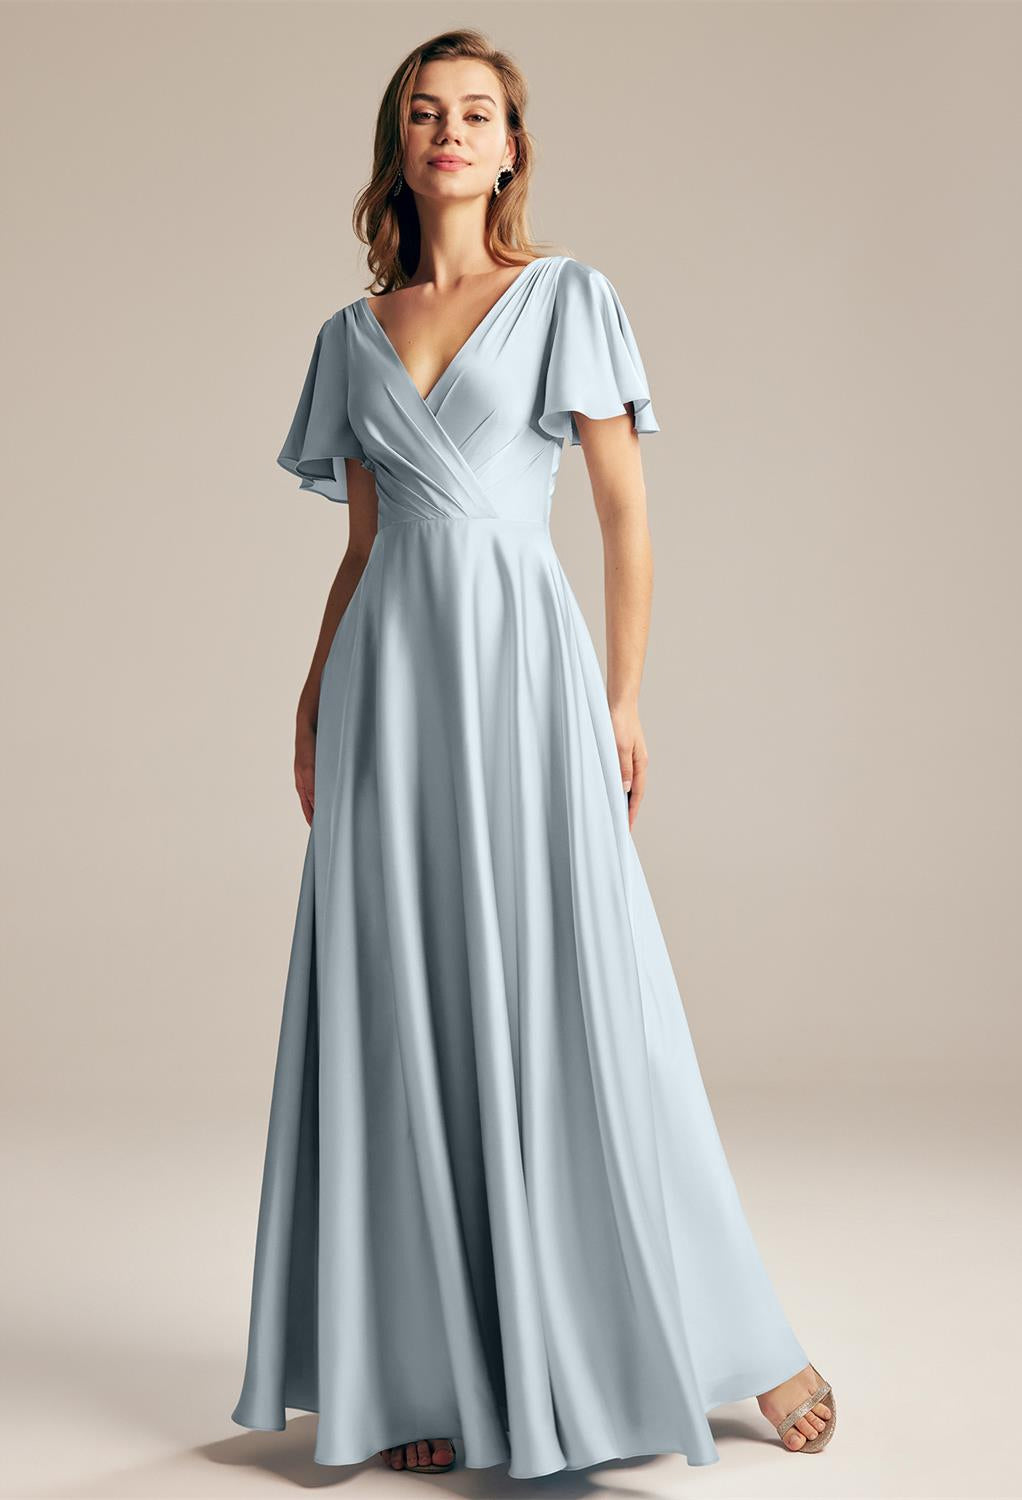 The bridesmaid is wearing a Furst - Satin Charmeuse Bridesmaid Dress - Off The Rack in London.